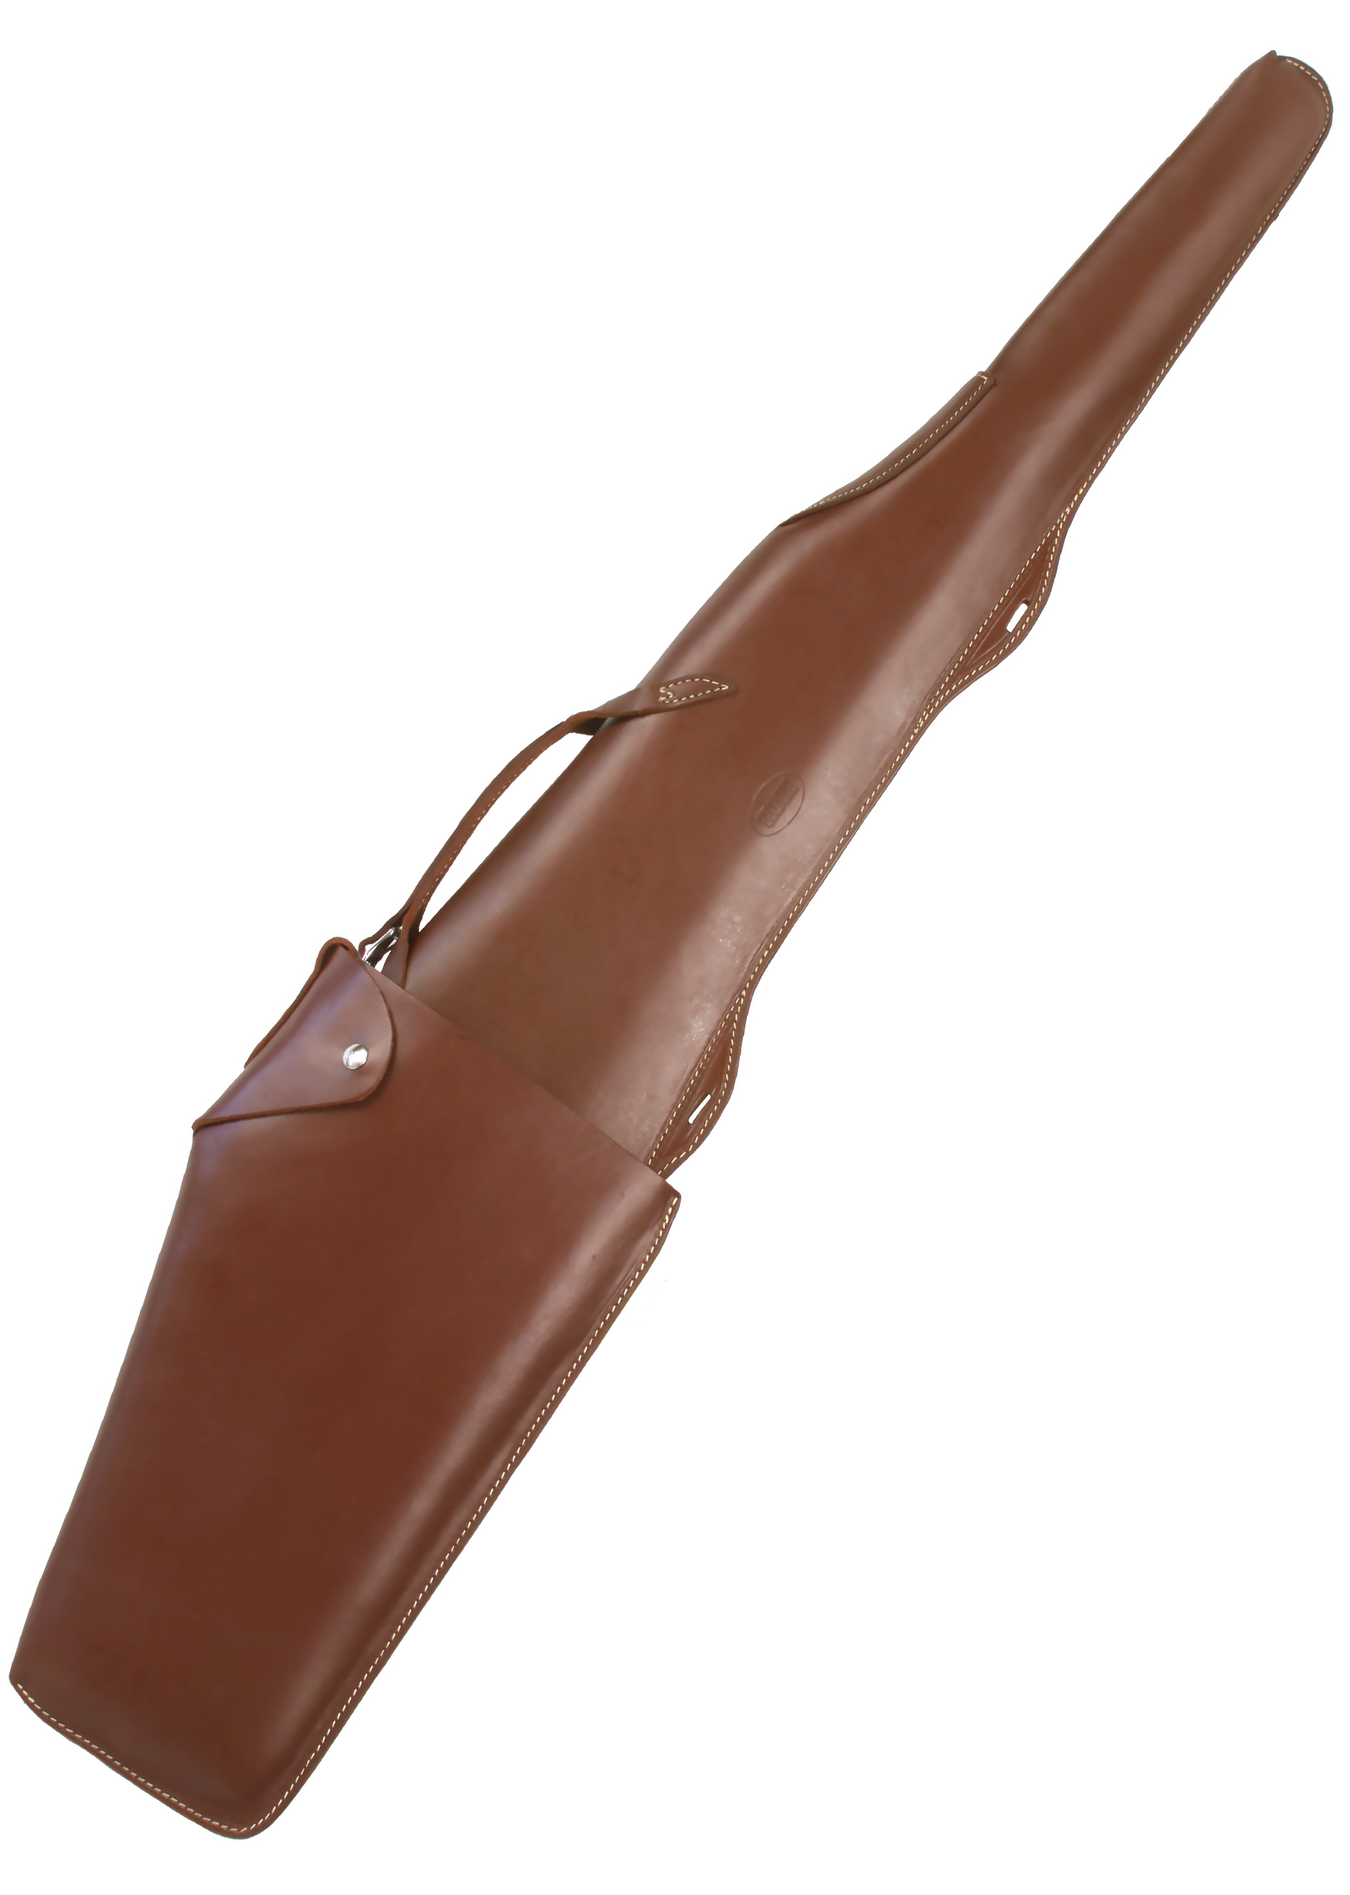 Bolt Action Scabbards